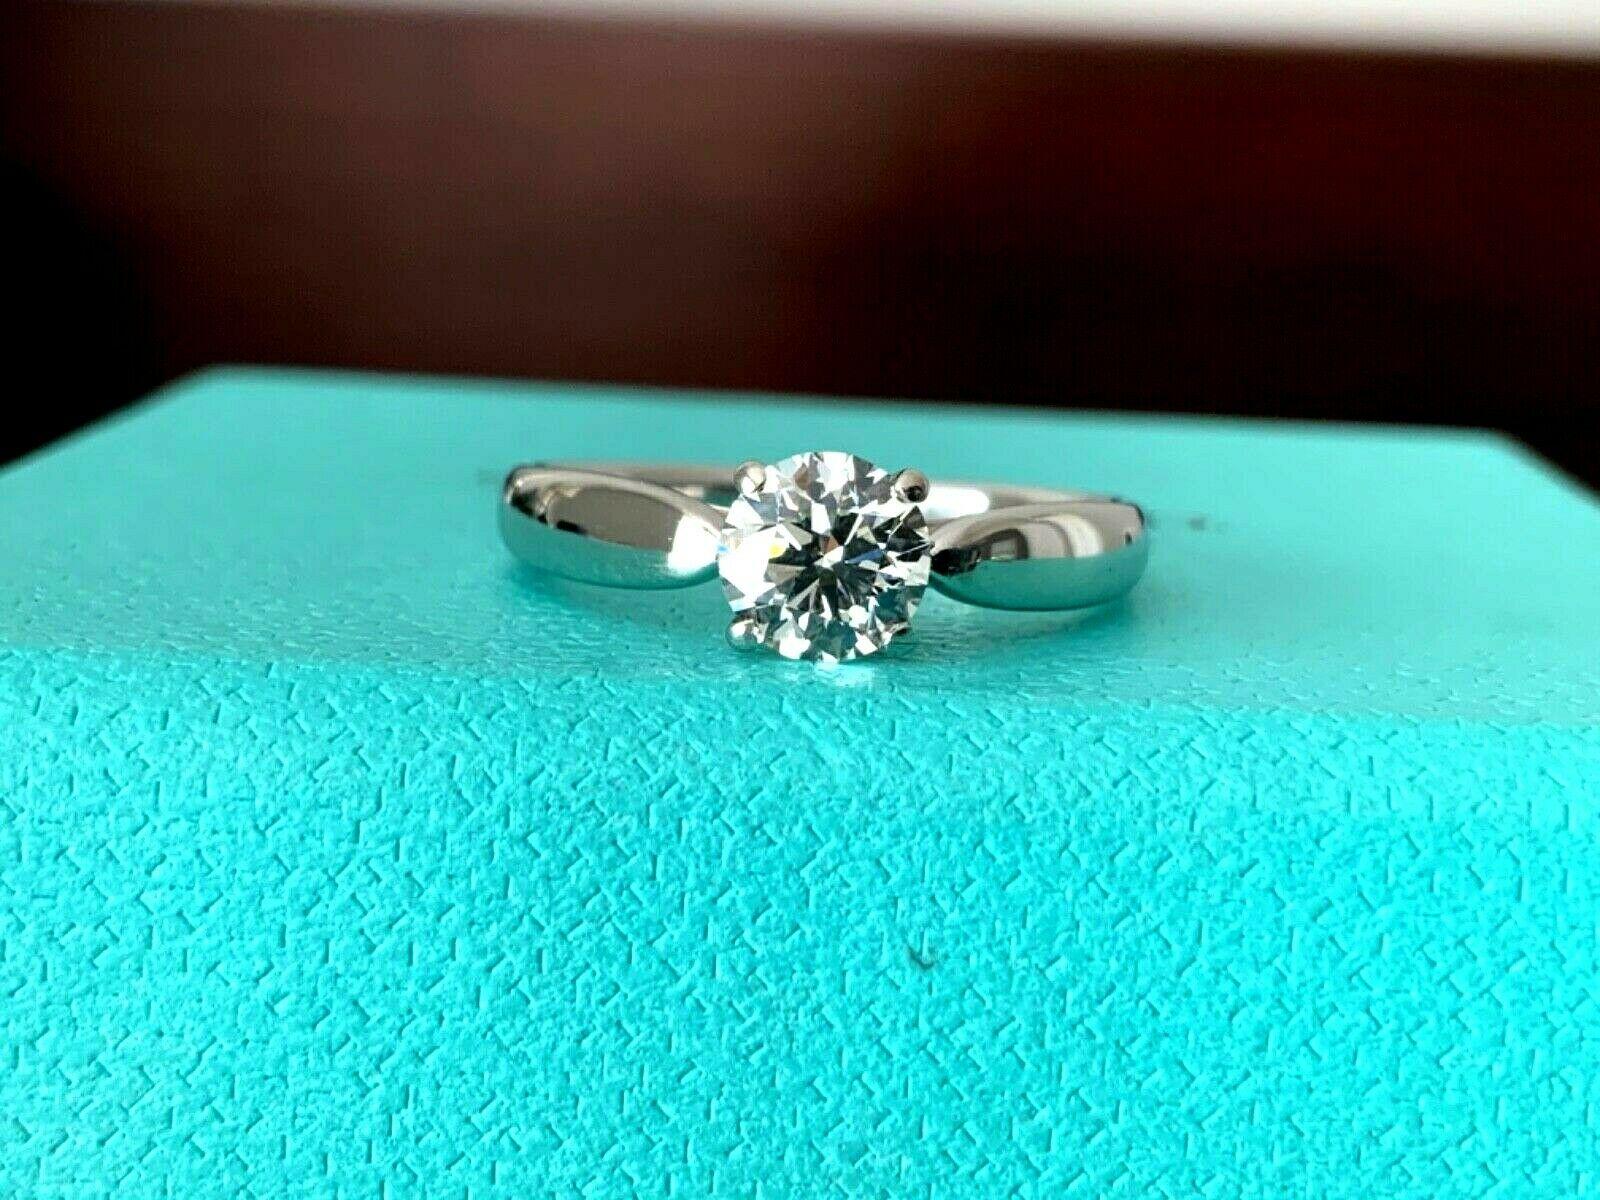 JUST IN TODAY!  

You are viewing one of the HOTTEST Tiffany & Co Round solitaires sold at Tiffany's and one of the HARDEST PRE-OWNED rings to find.  Do your research and you will be lucky to find another for sale preowned Tiffany Harmony with all